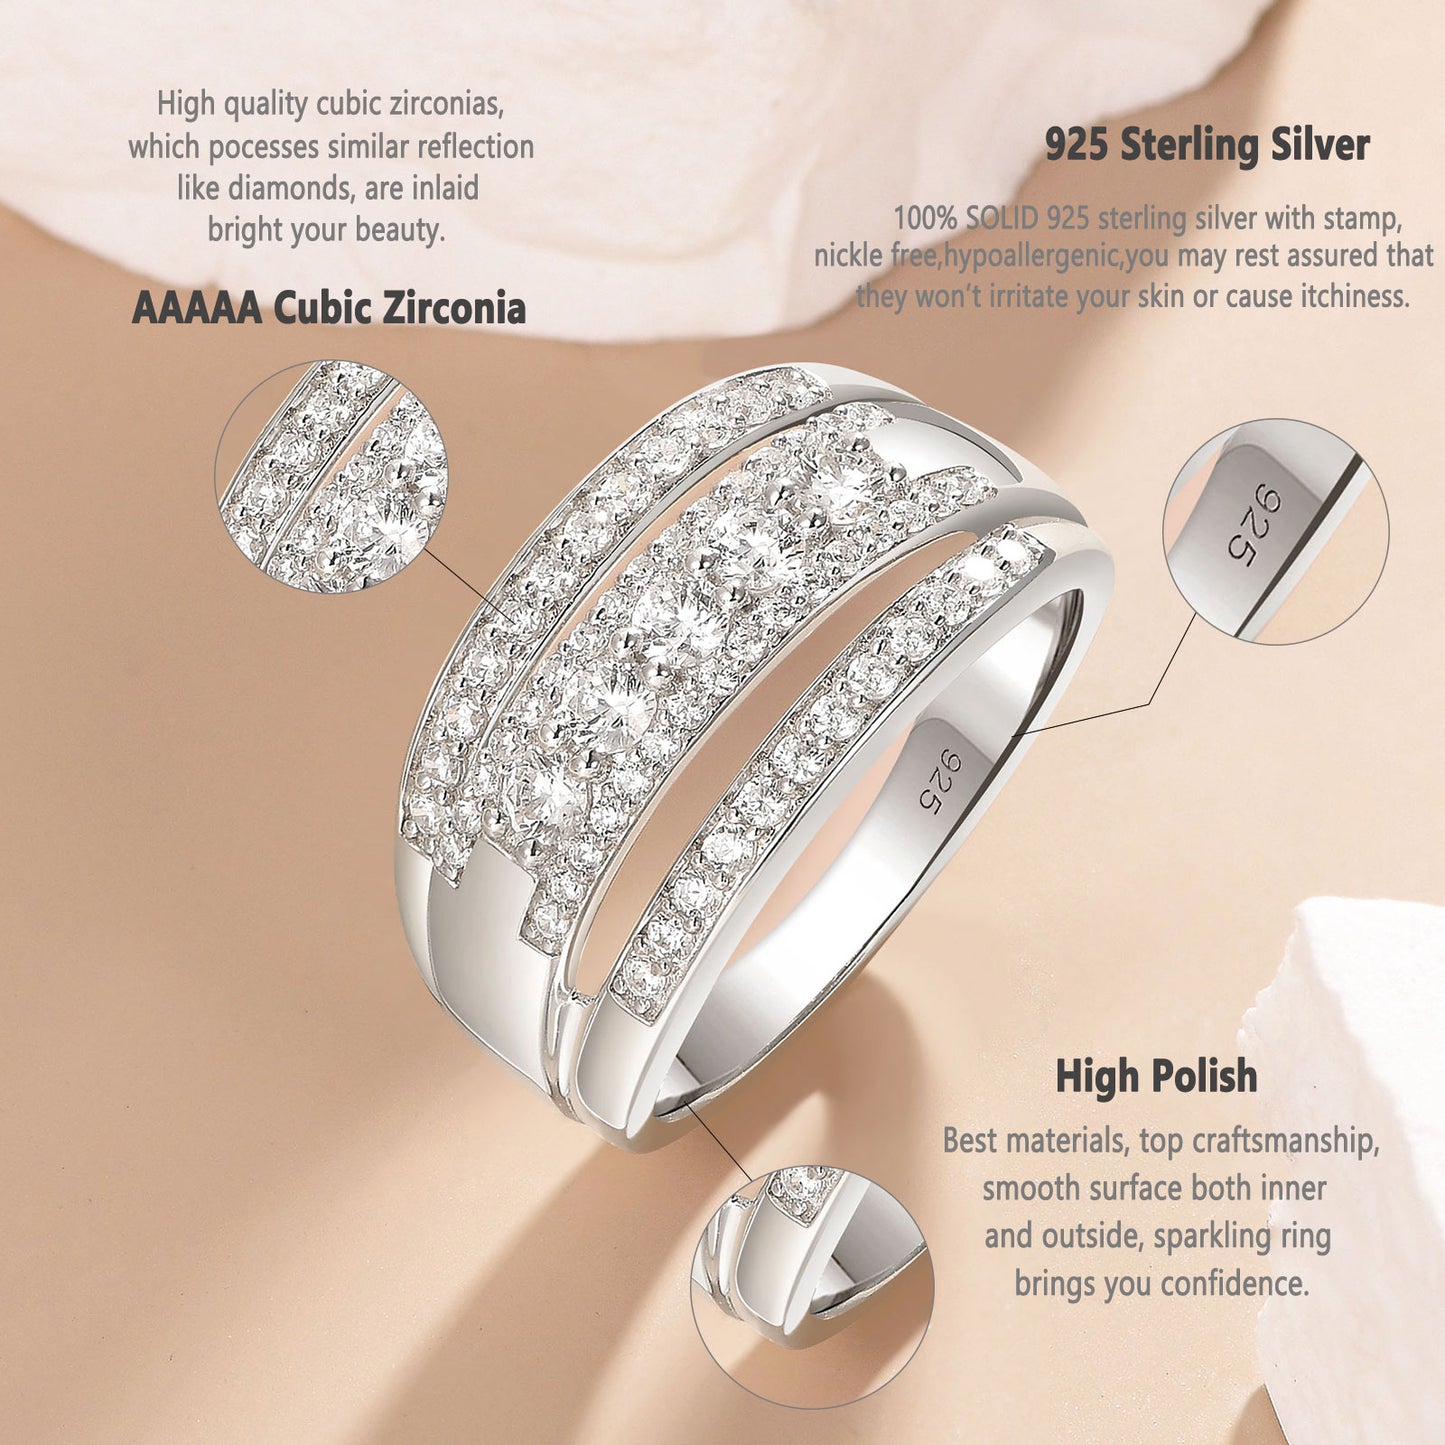 Newshe Jewellery 3-Row Wedding Bands for Women AAAAA Cz Wide Band Rings 925 Sterling Silver Eternity Statement Ring Size 5-10